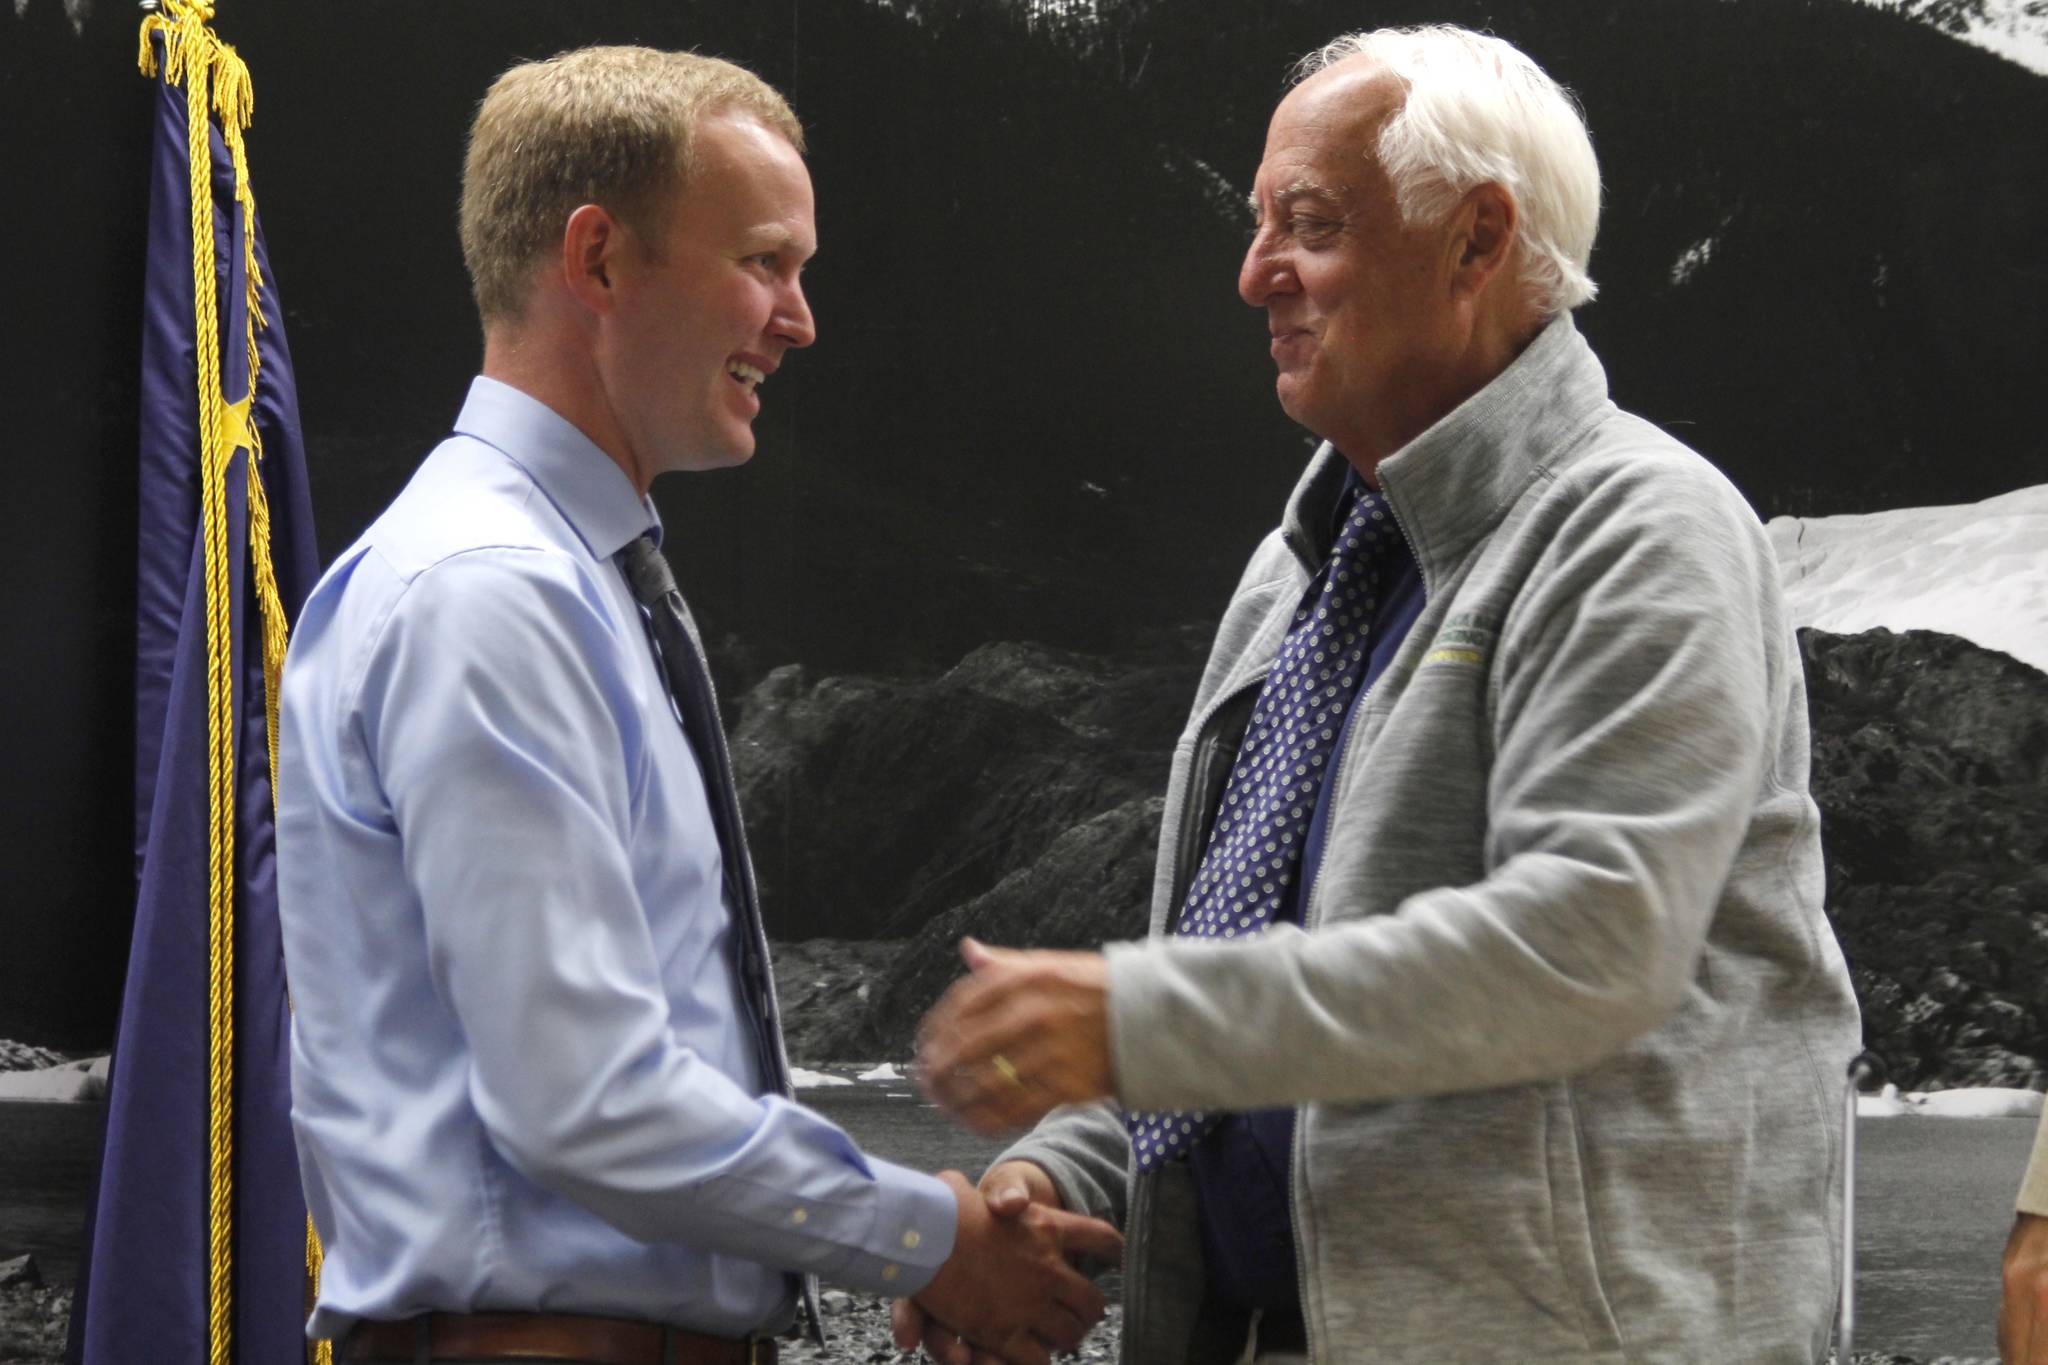 City Attorney Robert Palmer (left) shakes hands with Mayor Ken Koelsch moments after being named the City and Borough of Juneau’s municipal attorney. Palmer replaces Amy Mead, who was selected to be a Superior Court judge this summer. (Alex McCarthy | Juneau Empire)